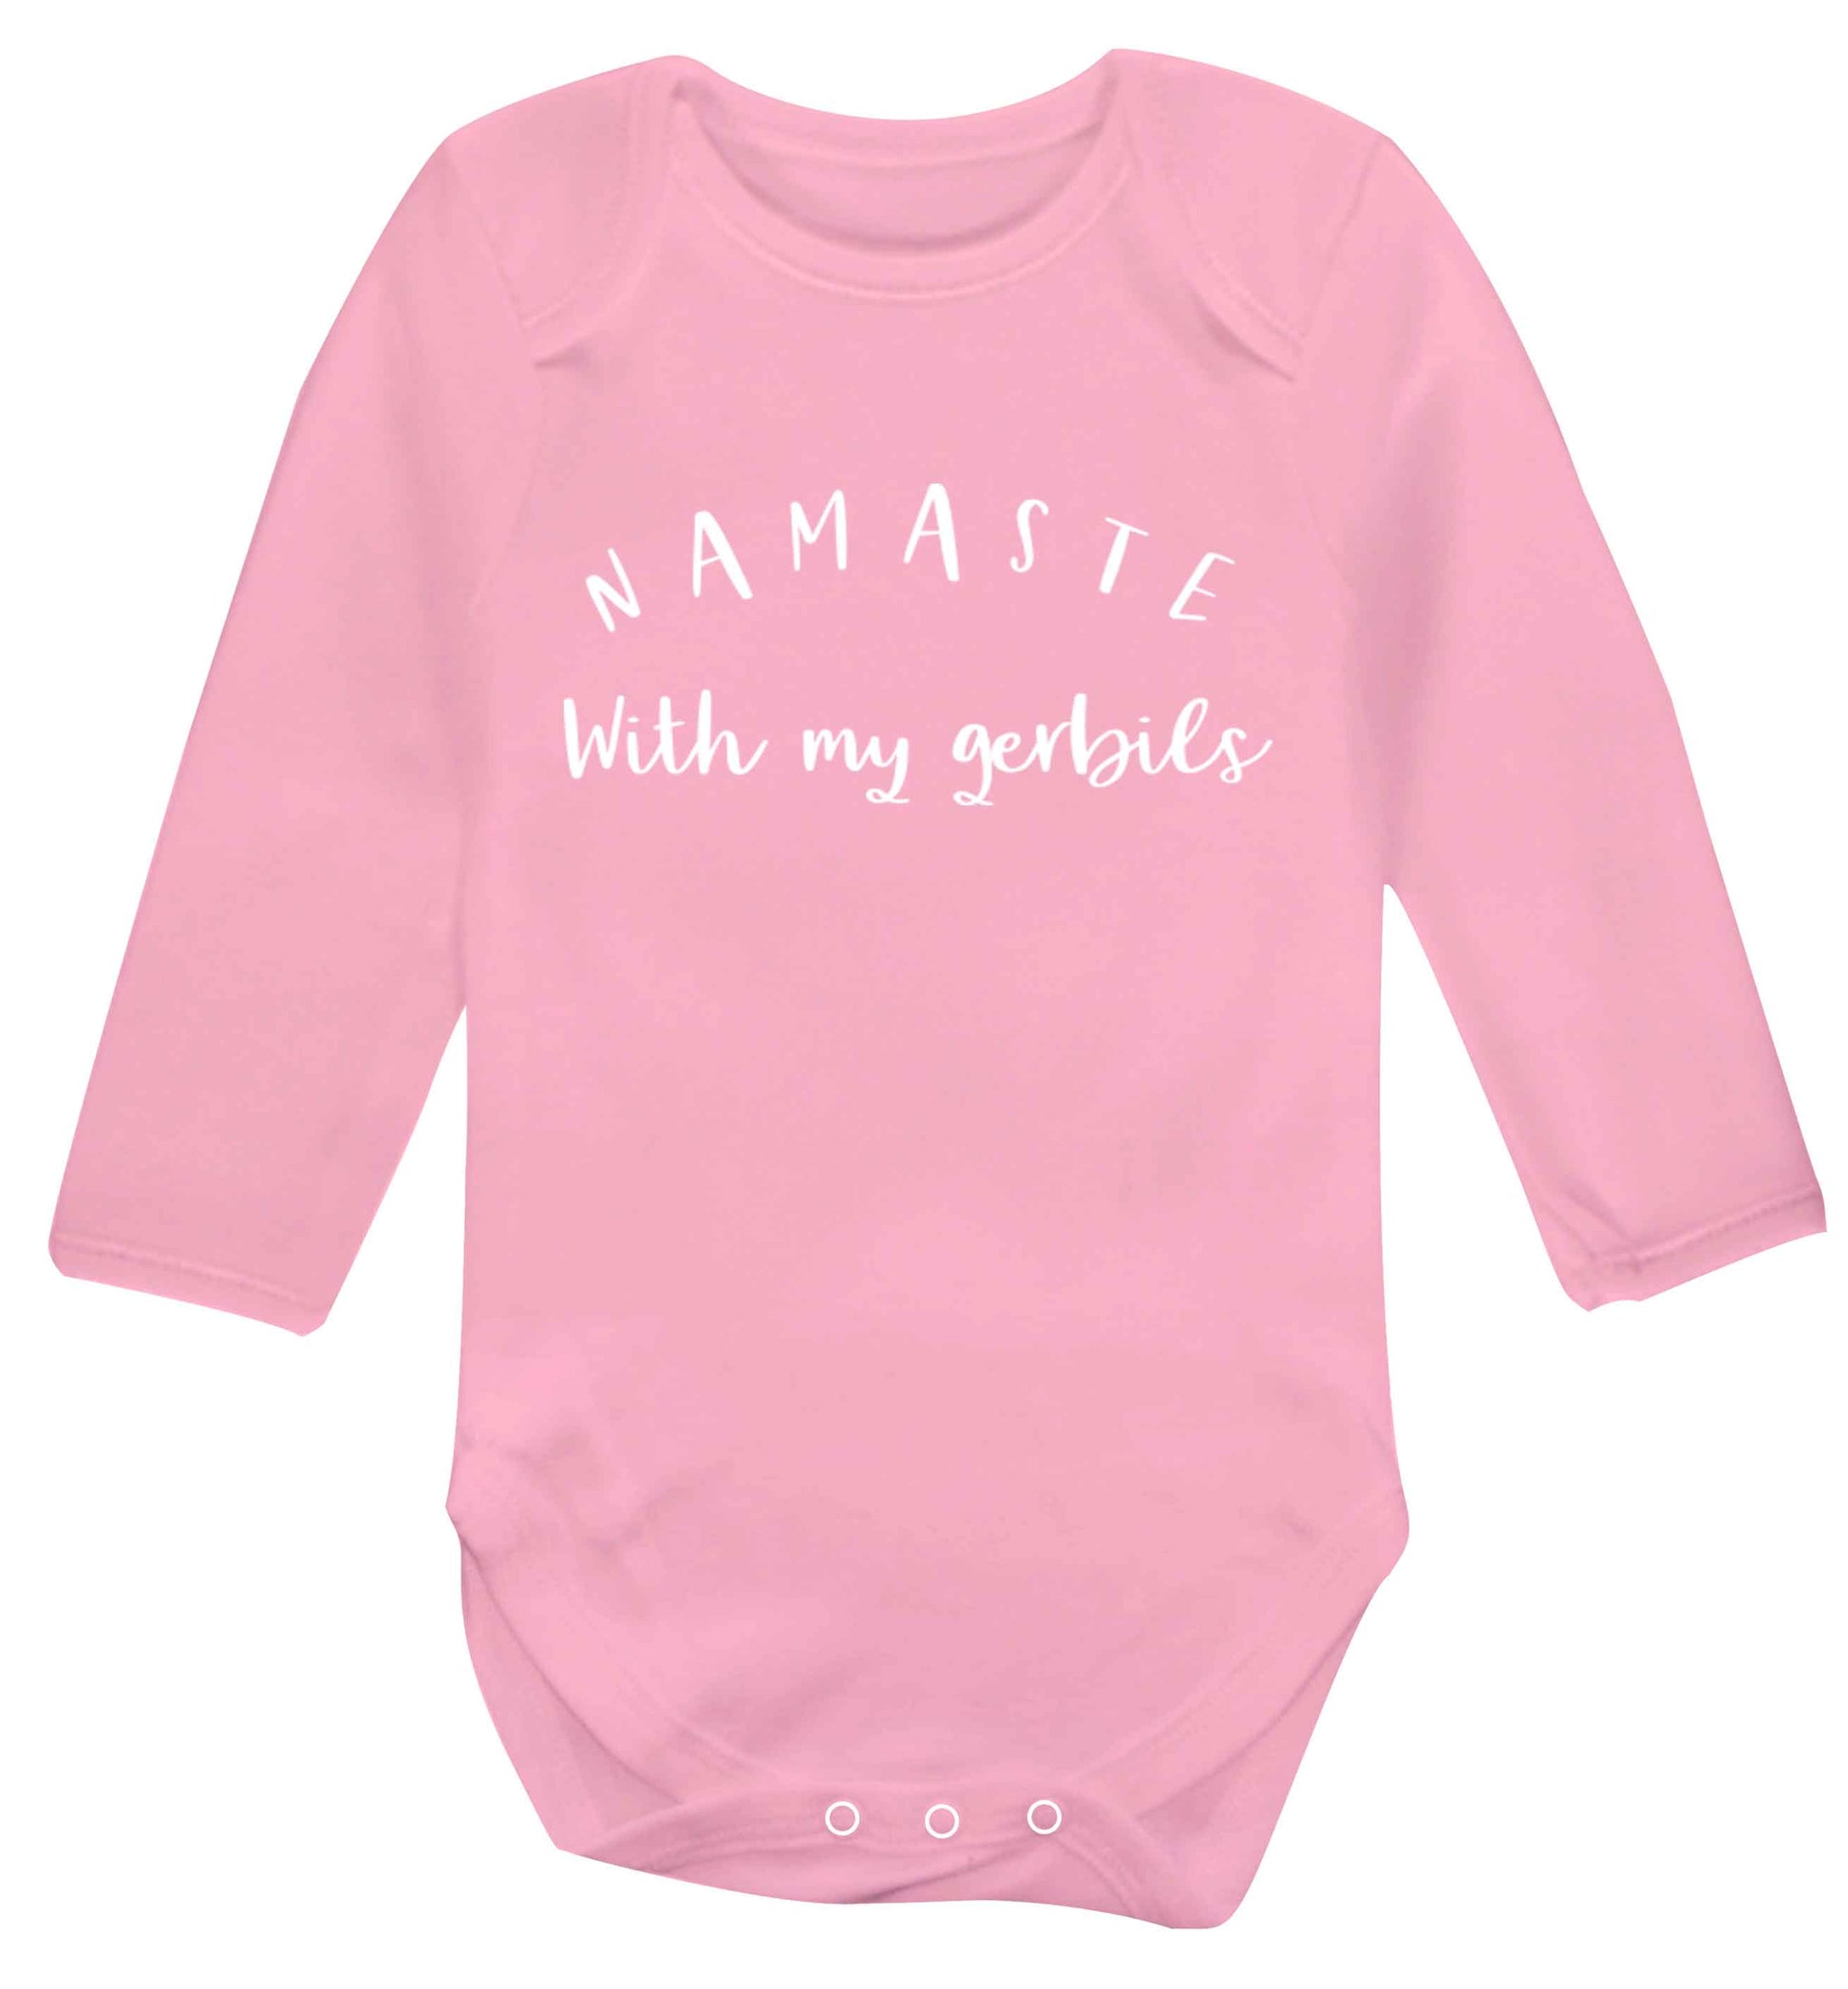 Namaste with my gerbils Baby Vest long sleeved pale pink 6-12 months